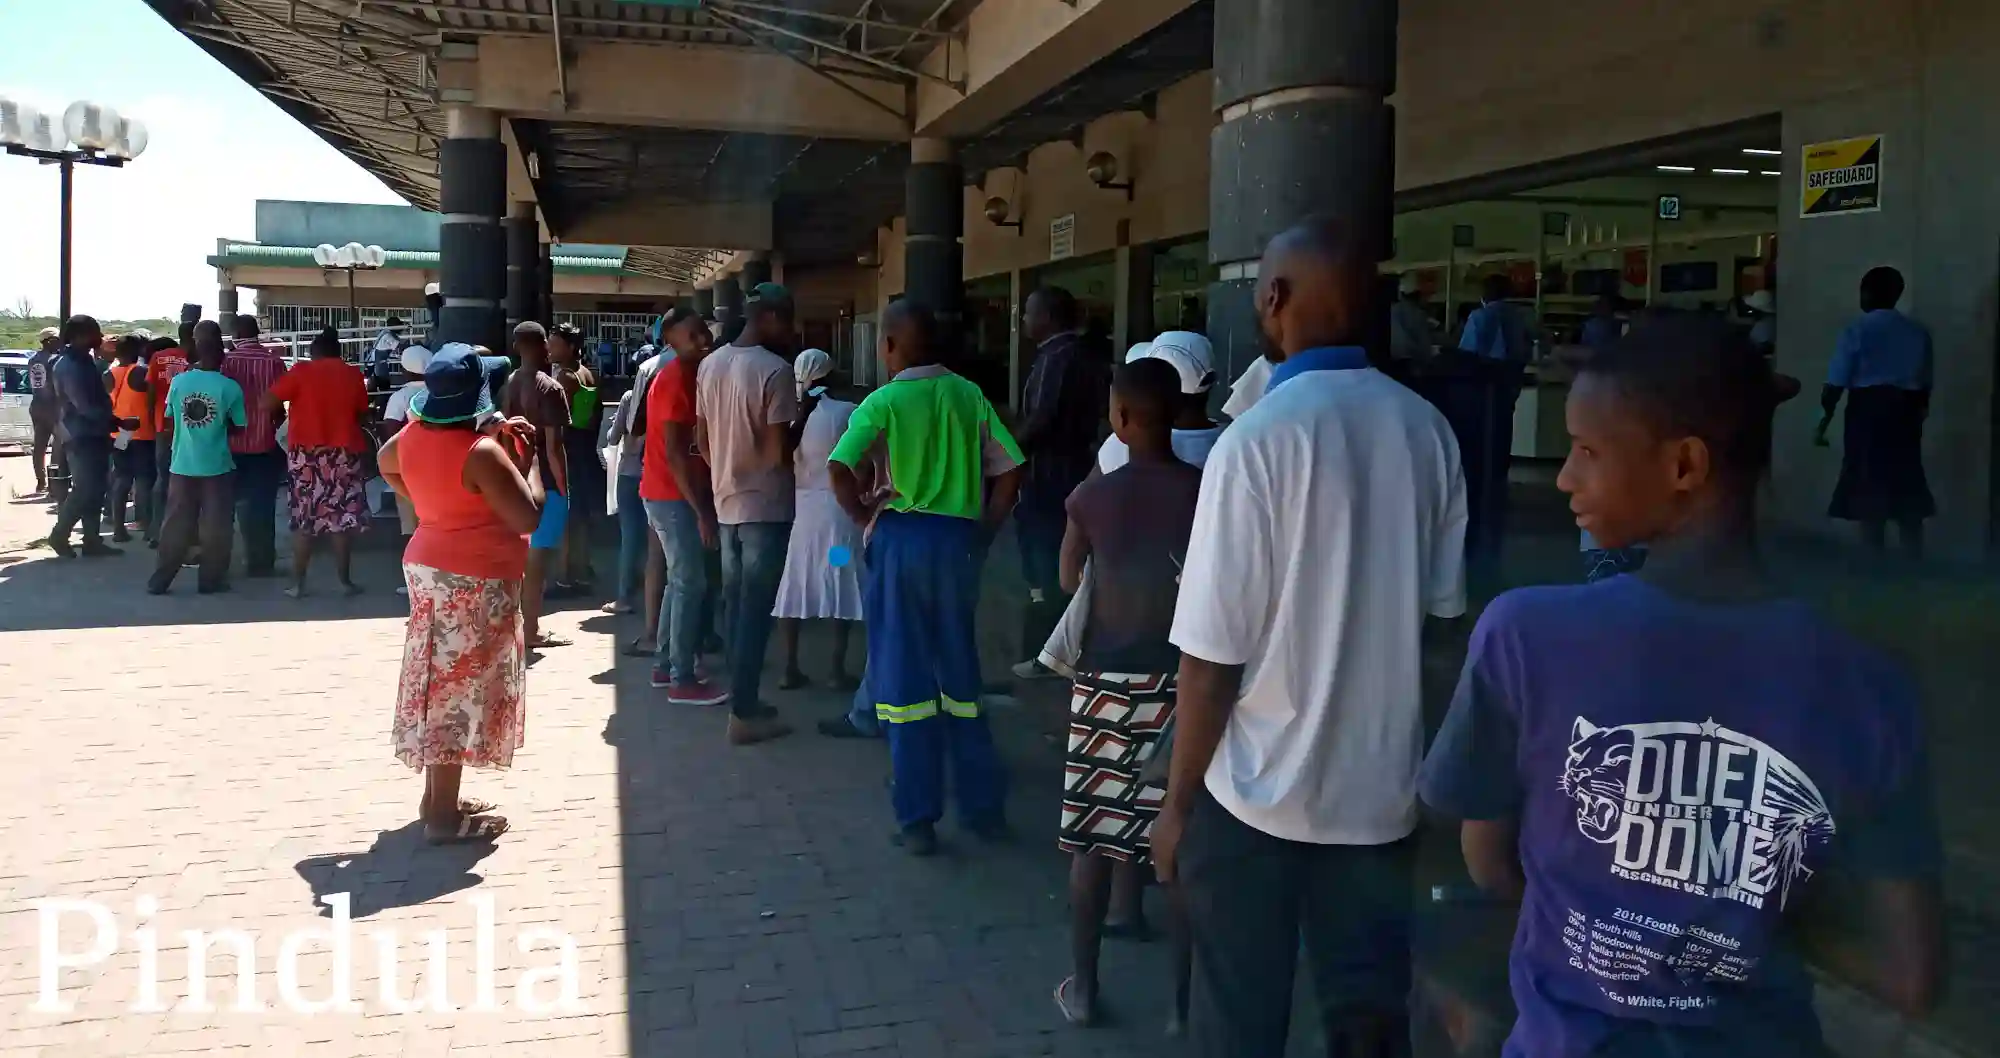 PICTURES: No Masks & No Social Distancing While Zimbabweans Shop During Lockdown. The Pick n Pay Experience